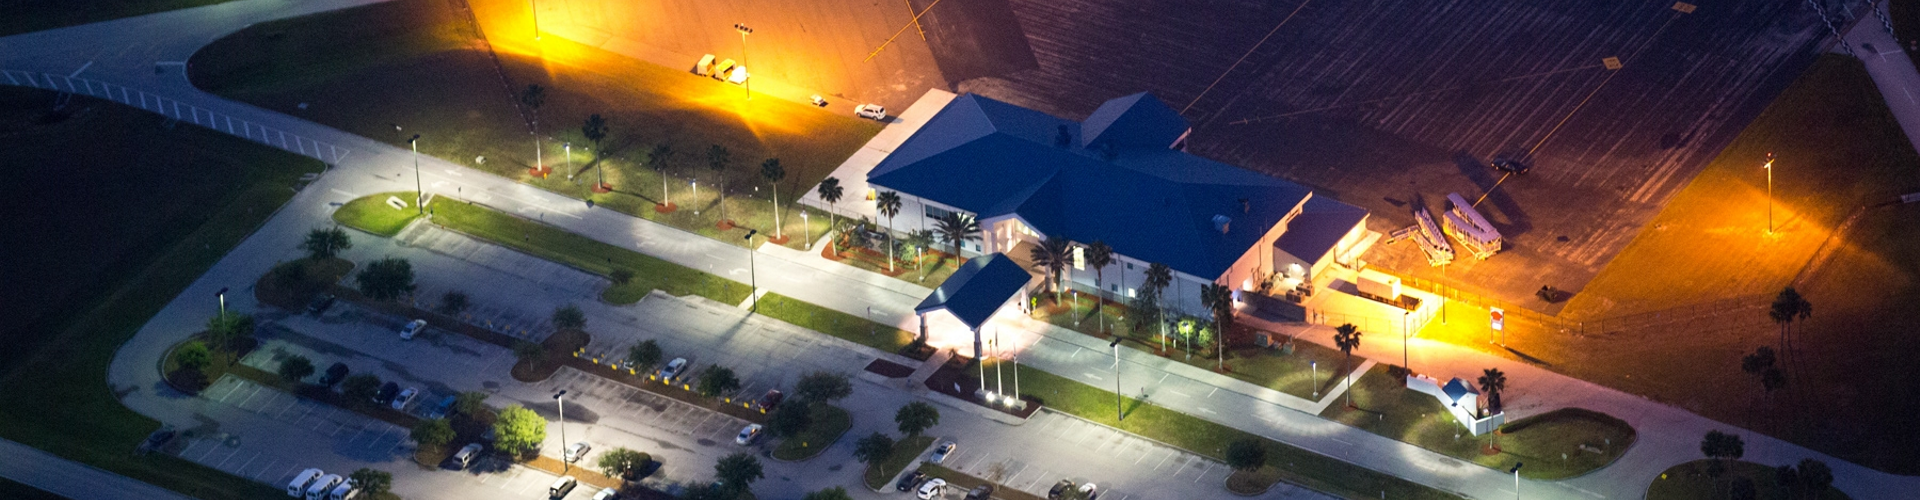 Night time image of Lakeland Airport Offices